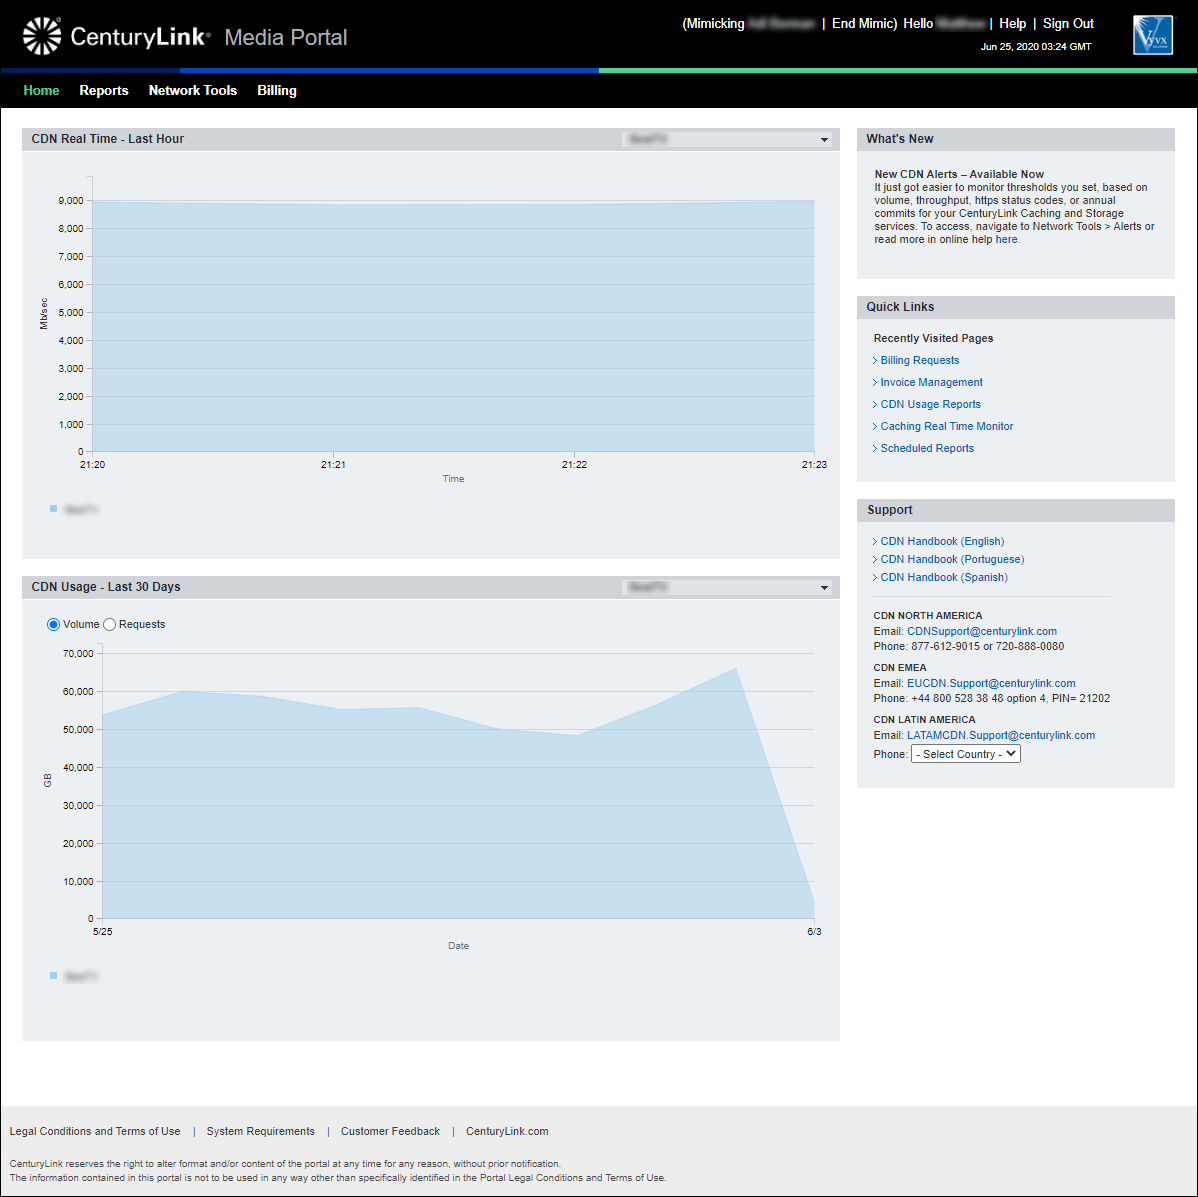 Media portal dashboard (showing mimicked user)